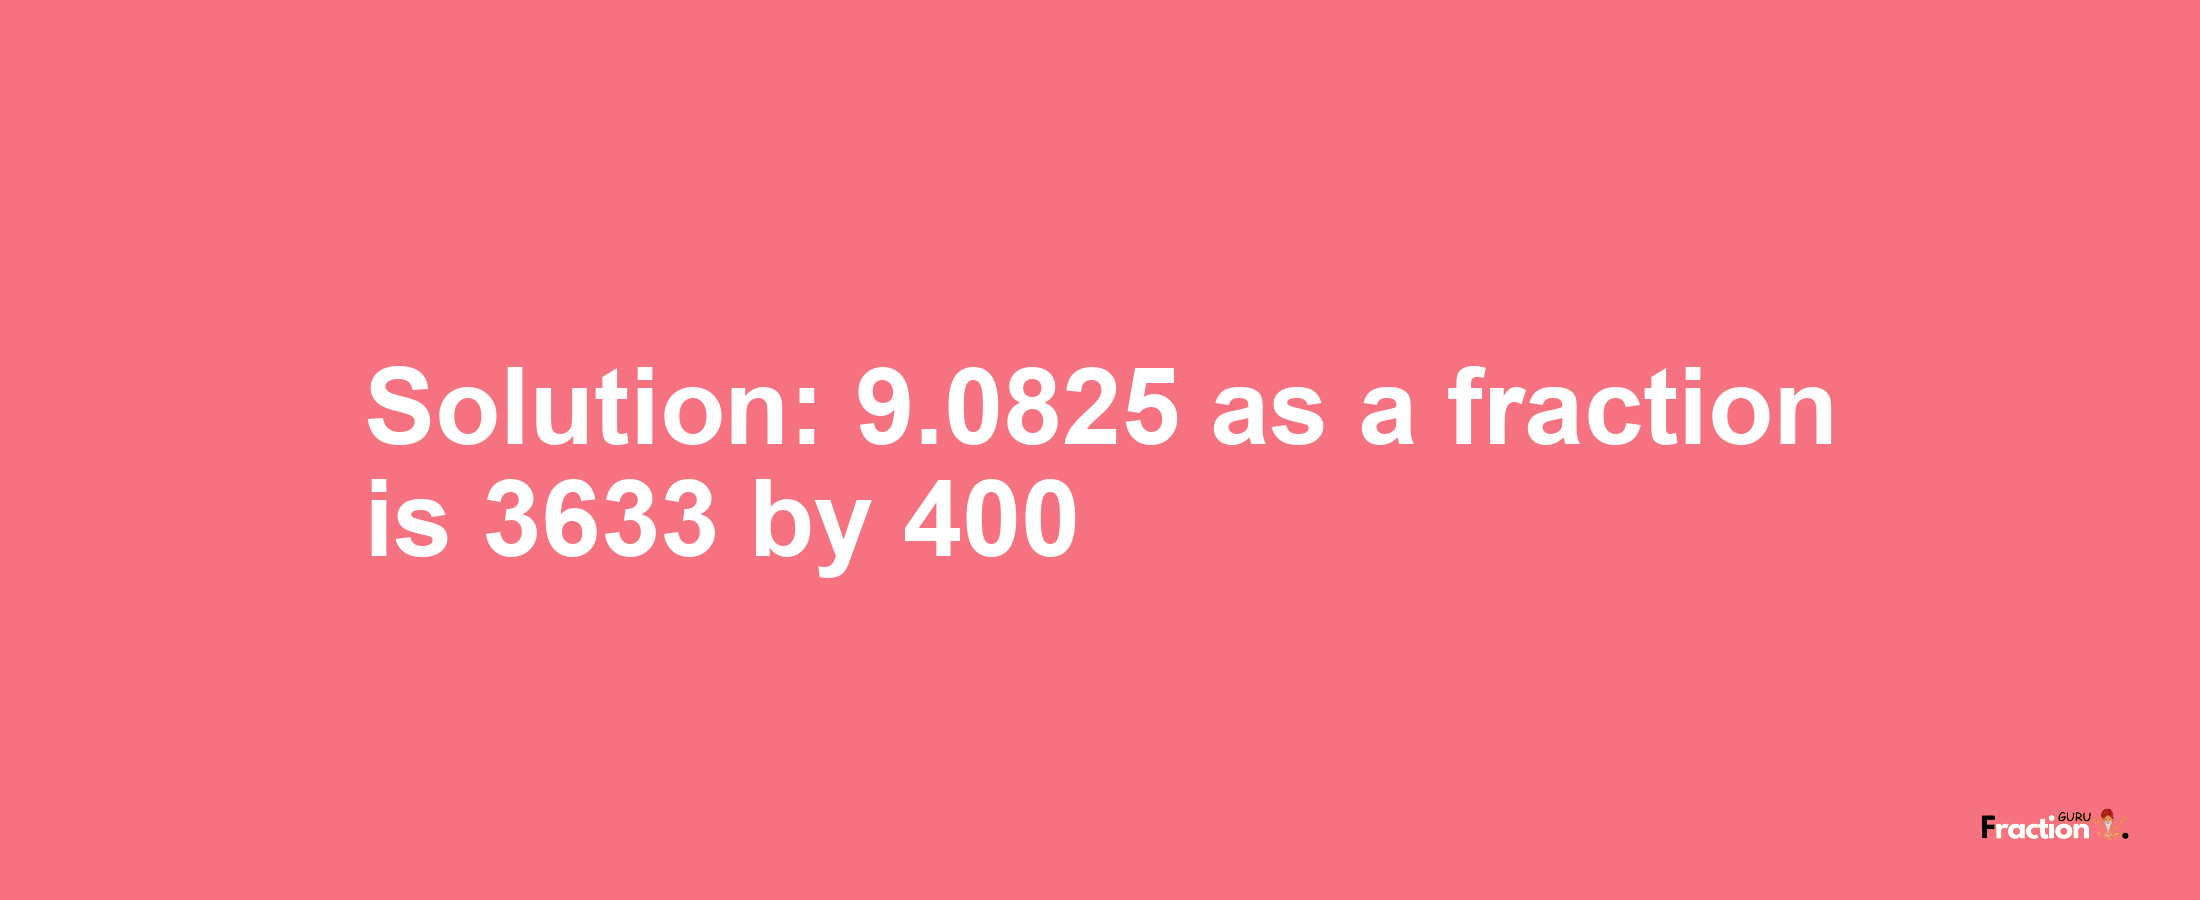 Solution:9.0825 as a fraction is 3633/400